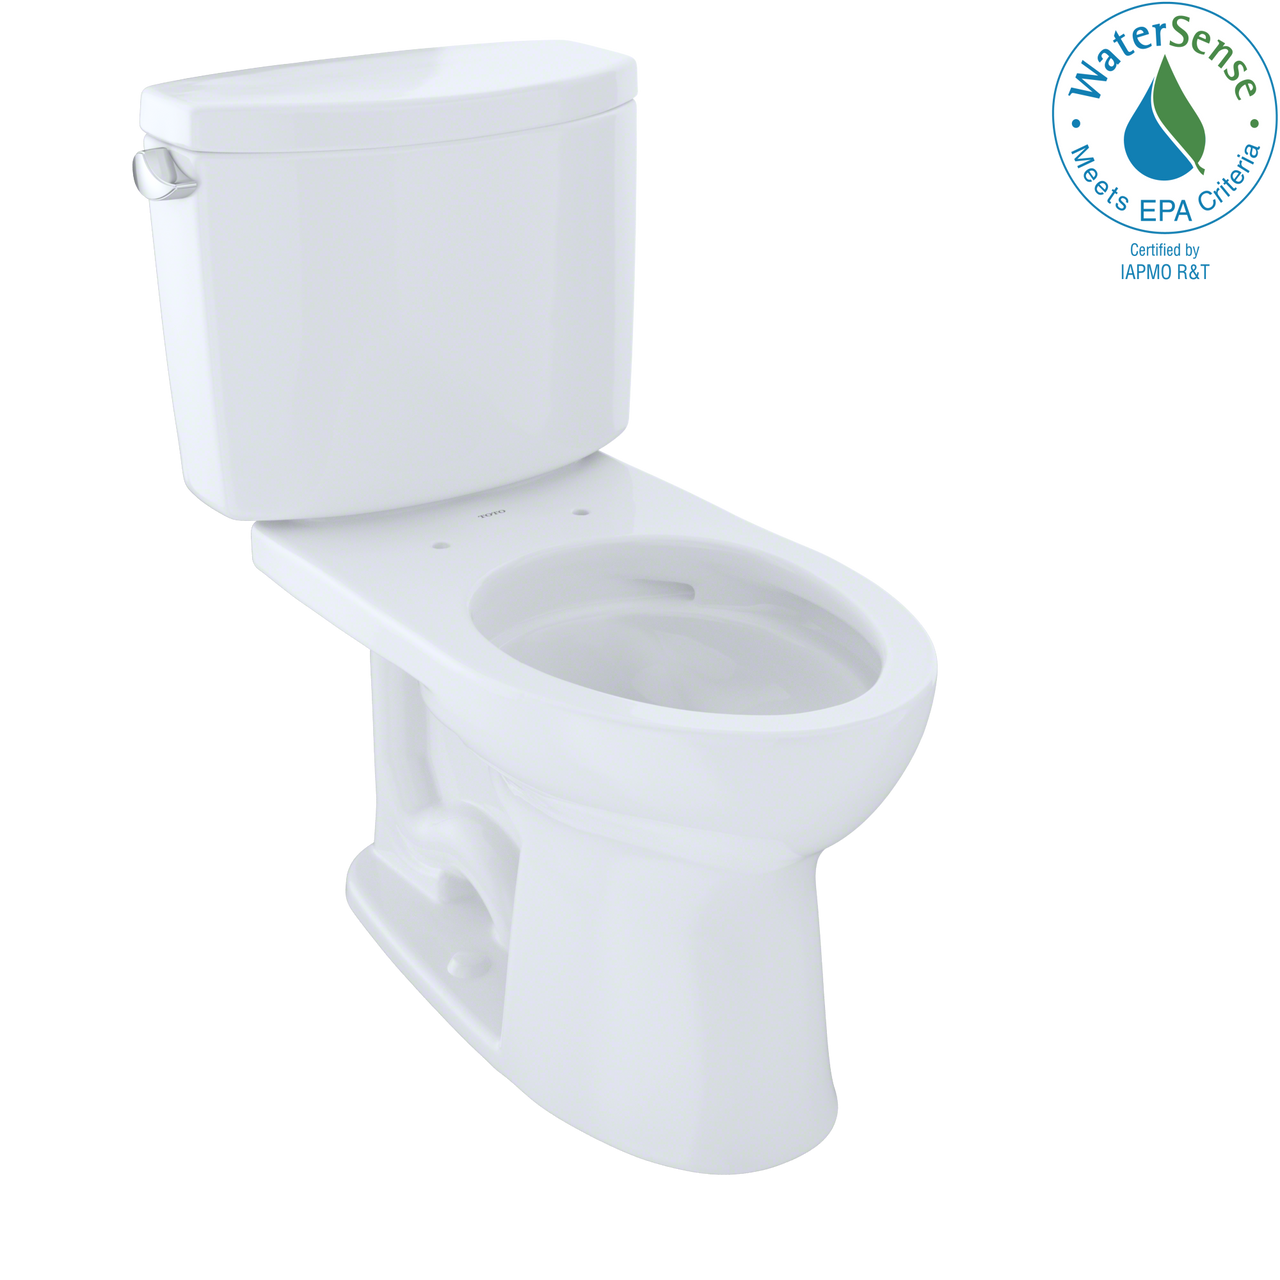 TOTO Drake II Two-Piece Elongated 1.28 GPF Universal Height Toilet with CeFiONtect,  - CST454CEFG#01 - BNGBath